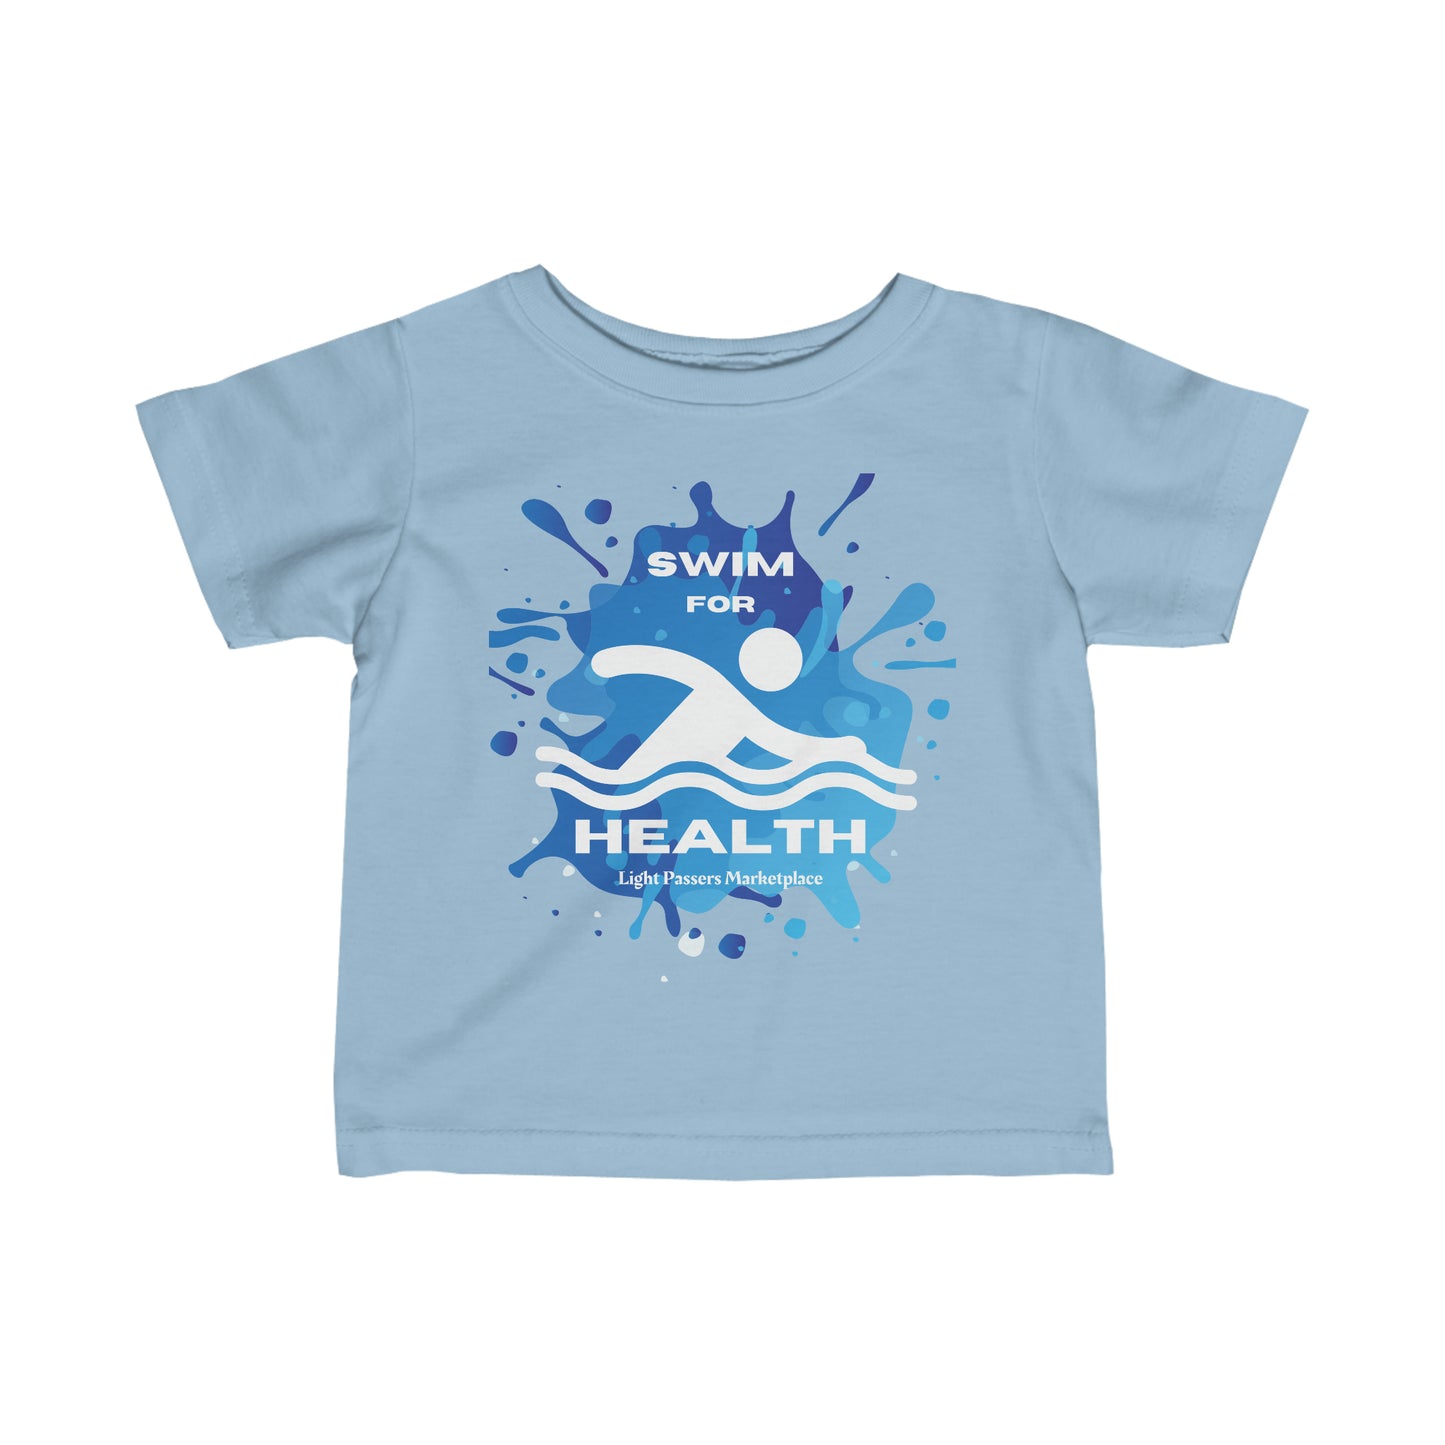 Light Passers Marketplace Swim for Health Baby T-shirts Fitness, Simple Messages